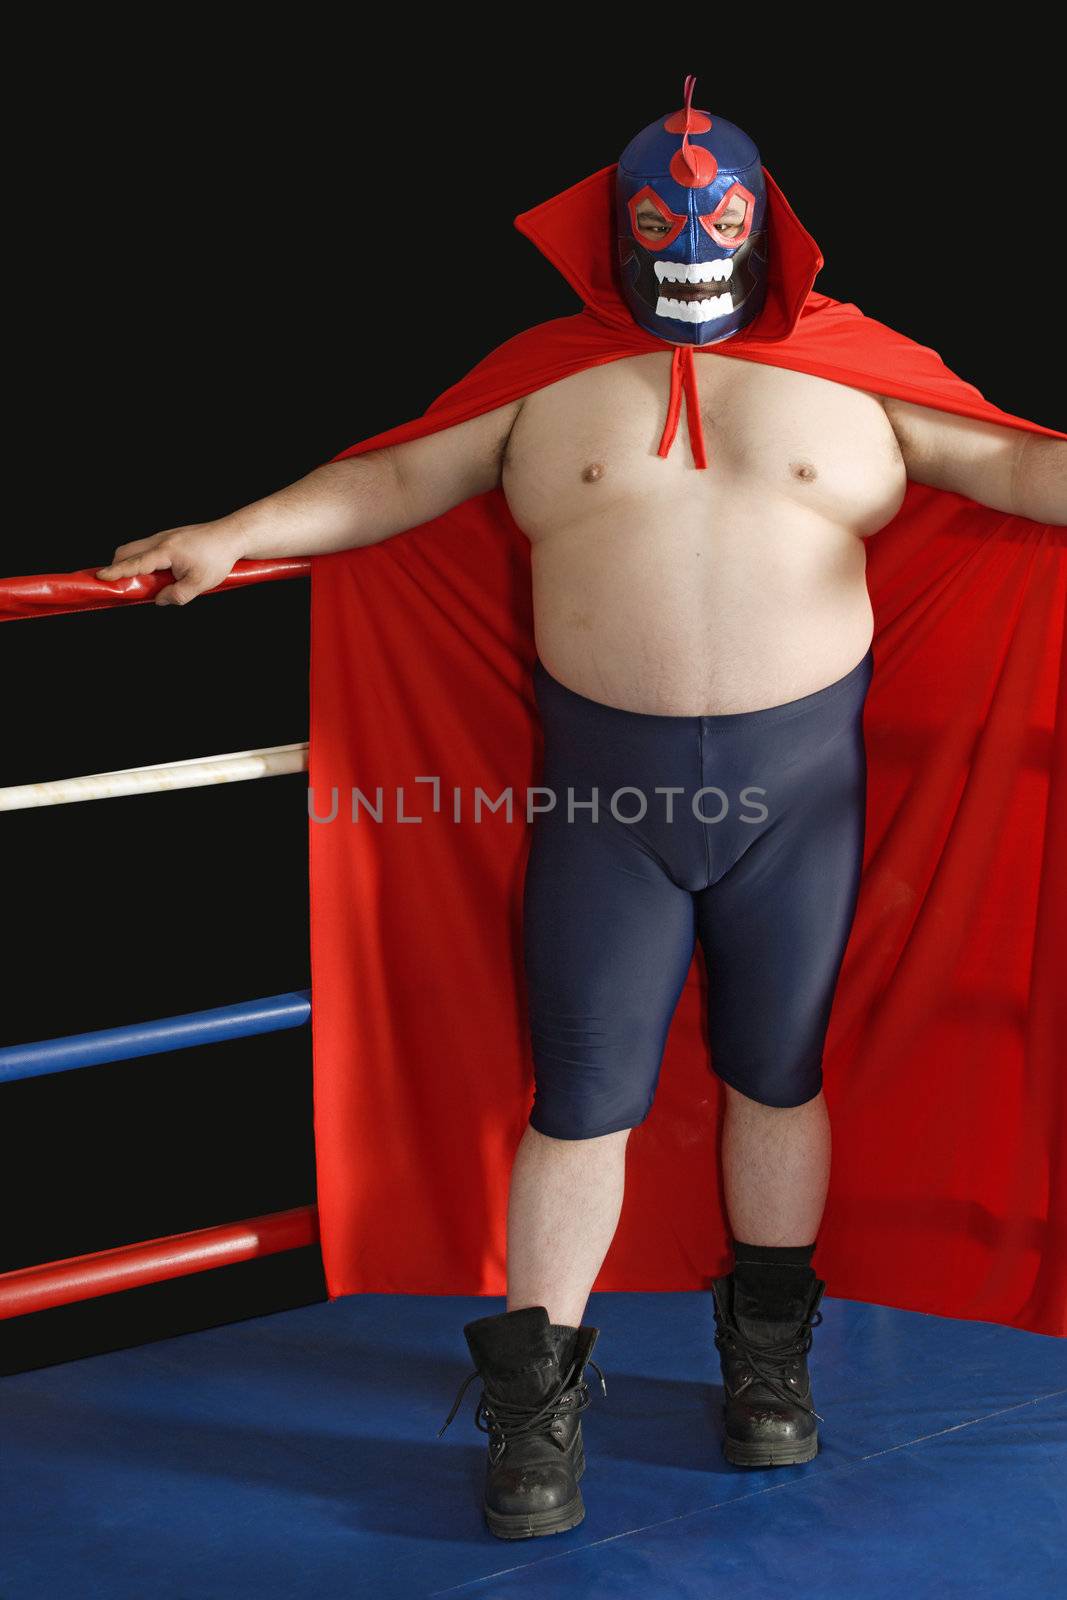 Photograph of a Mexican wrestler or Luchador standing in a wrestling ring.
